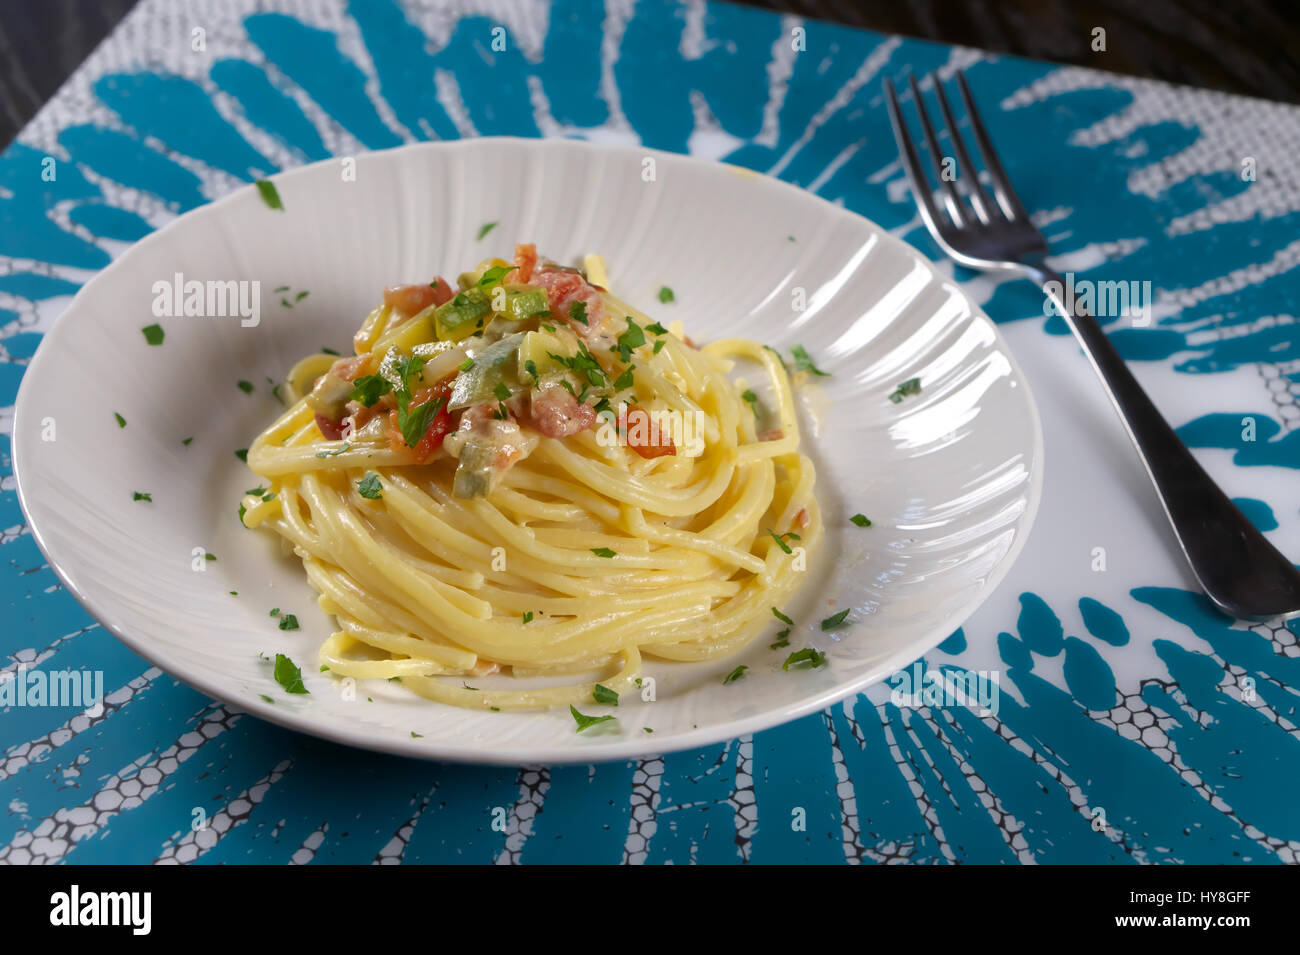 Vegetarian Carbonara - Zucchini (Courgette) and egg spaghetti pasta - Veggie italian recipe served with fork on white and light blue placemat Stock Photo